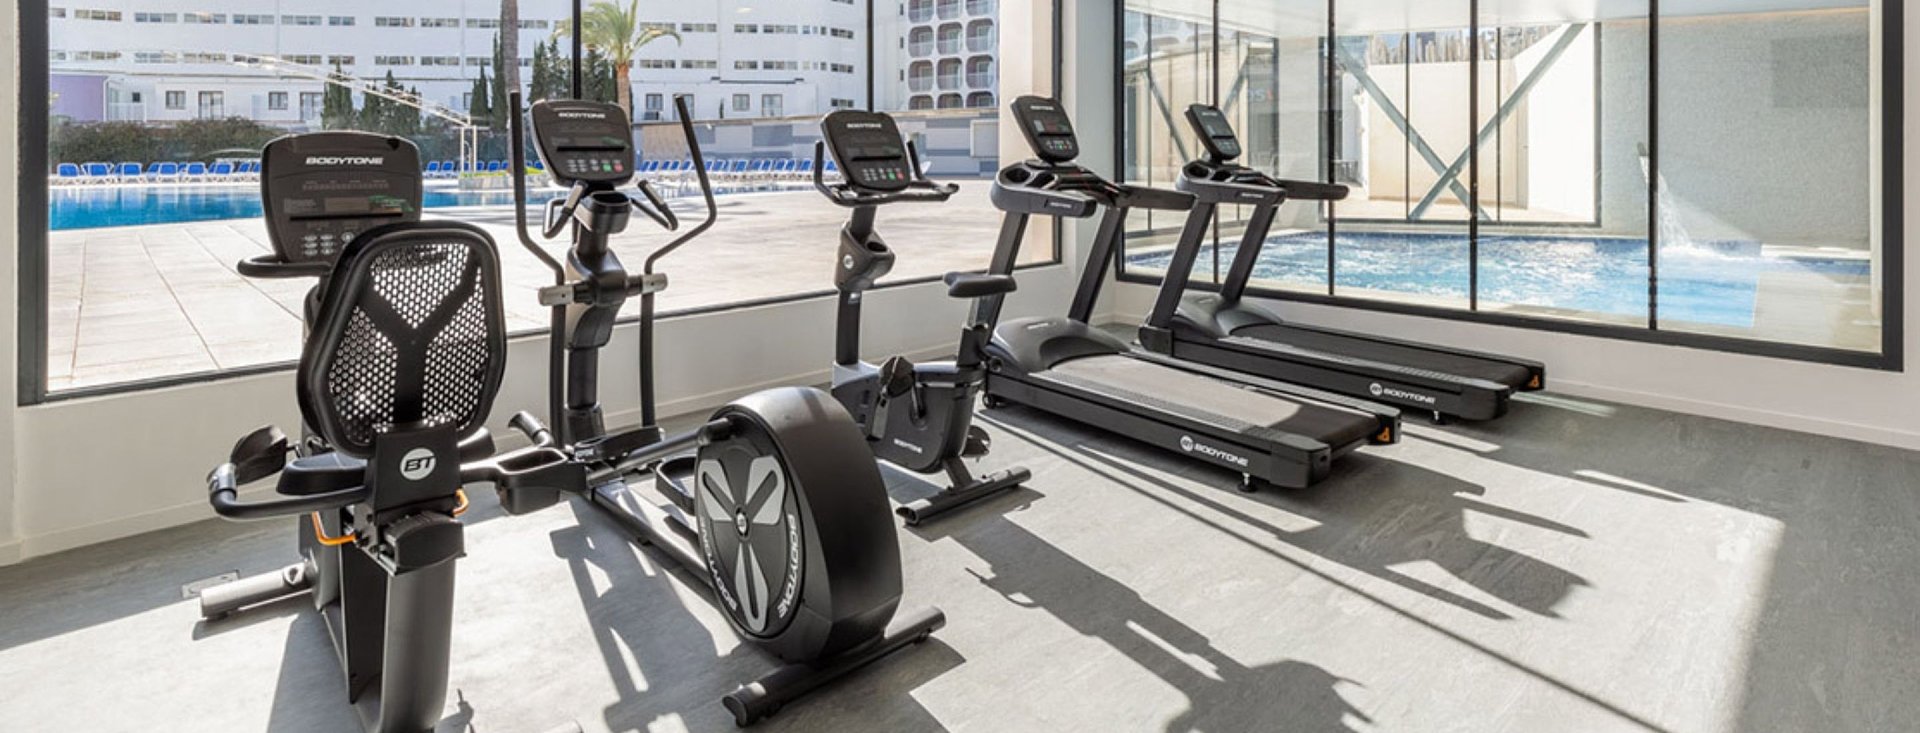 FITNESS SOLUTIONSfor HOTELS